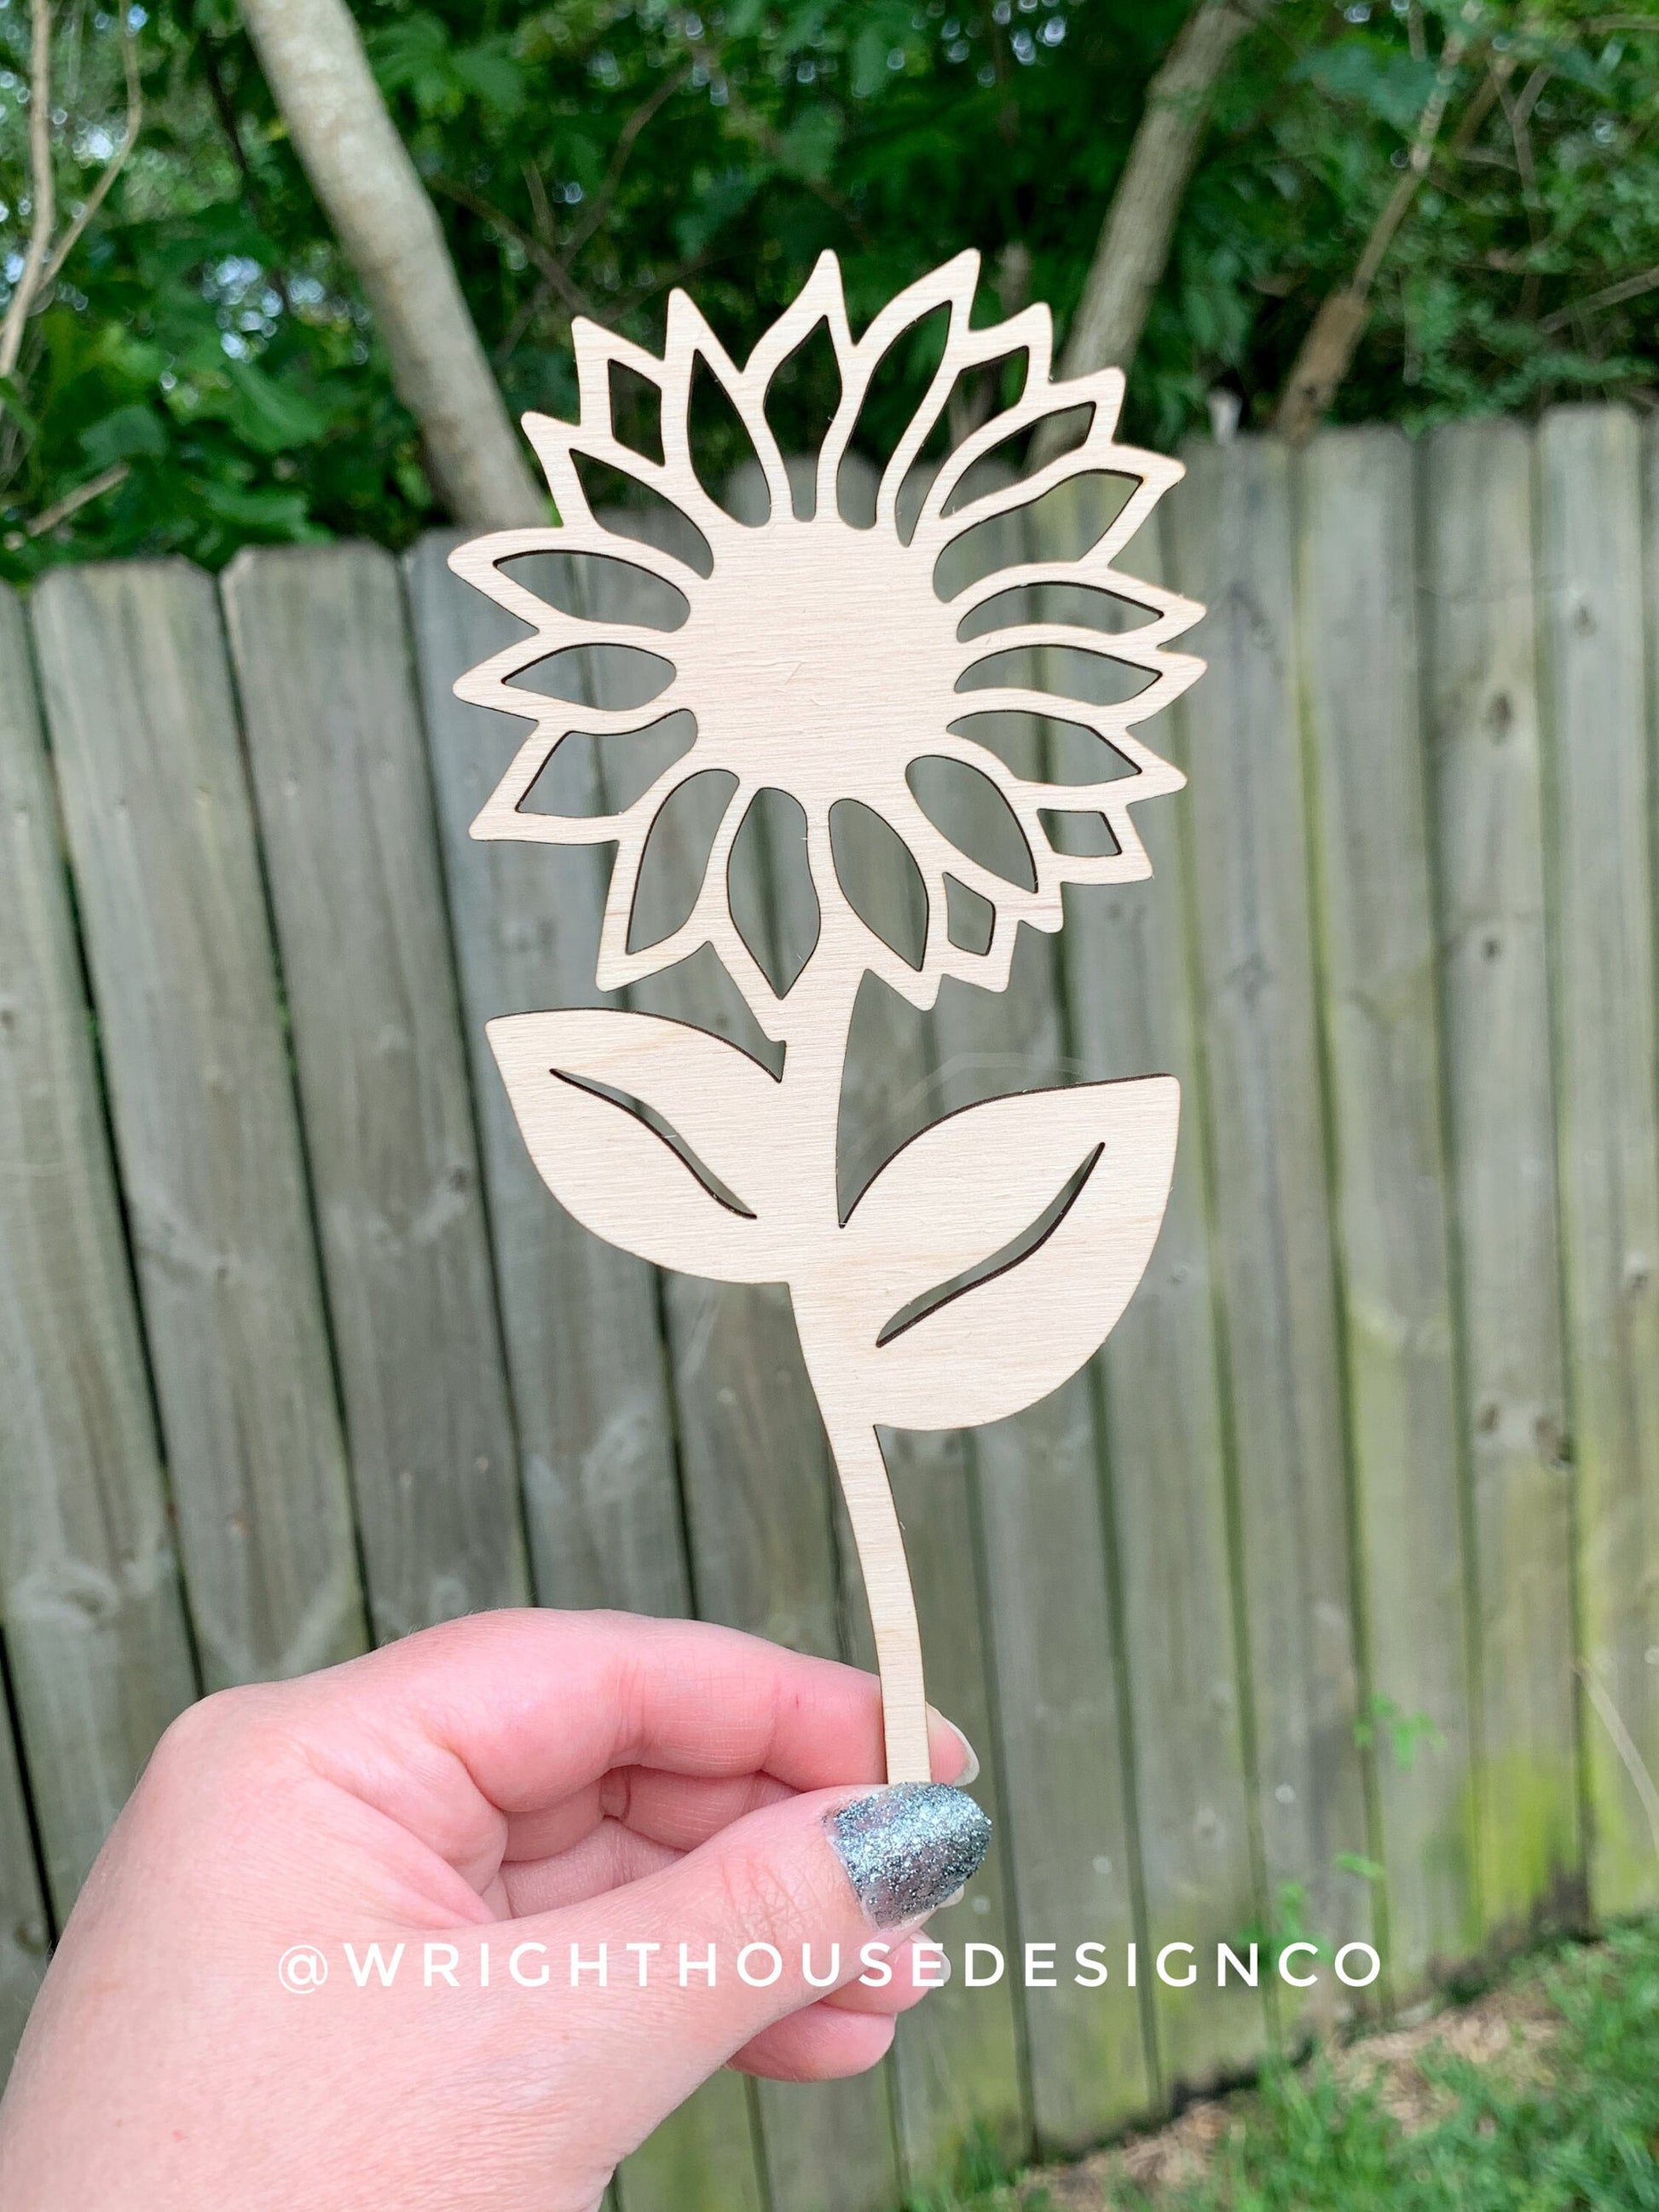 Sunflower Wooden Laser Cut Flowers - Simple Diy Florals For Bouquets - Files for Sign Making - SVG Cut File For Glowforge - Digital File